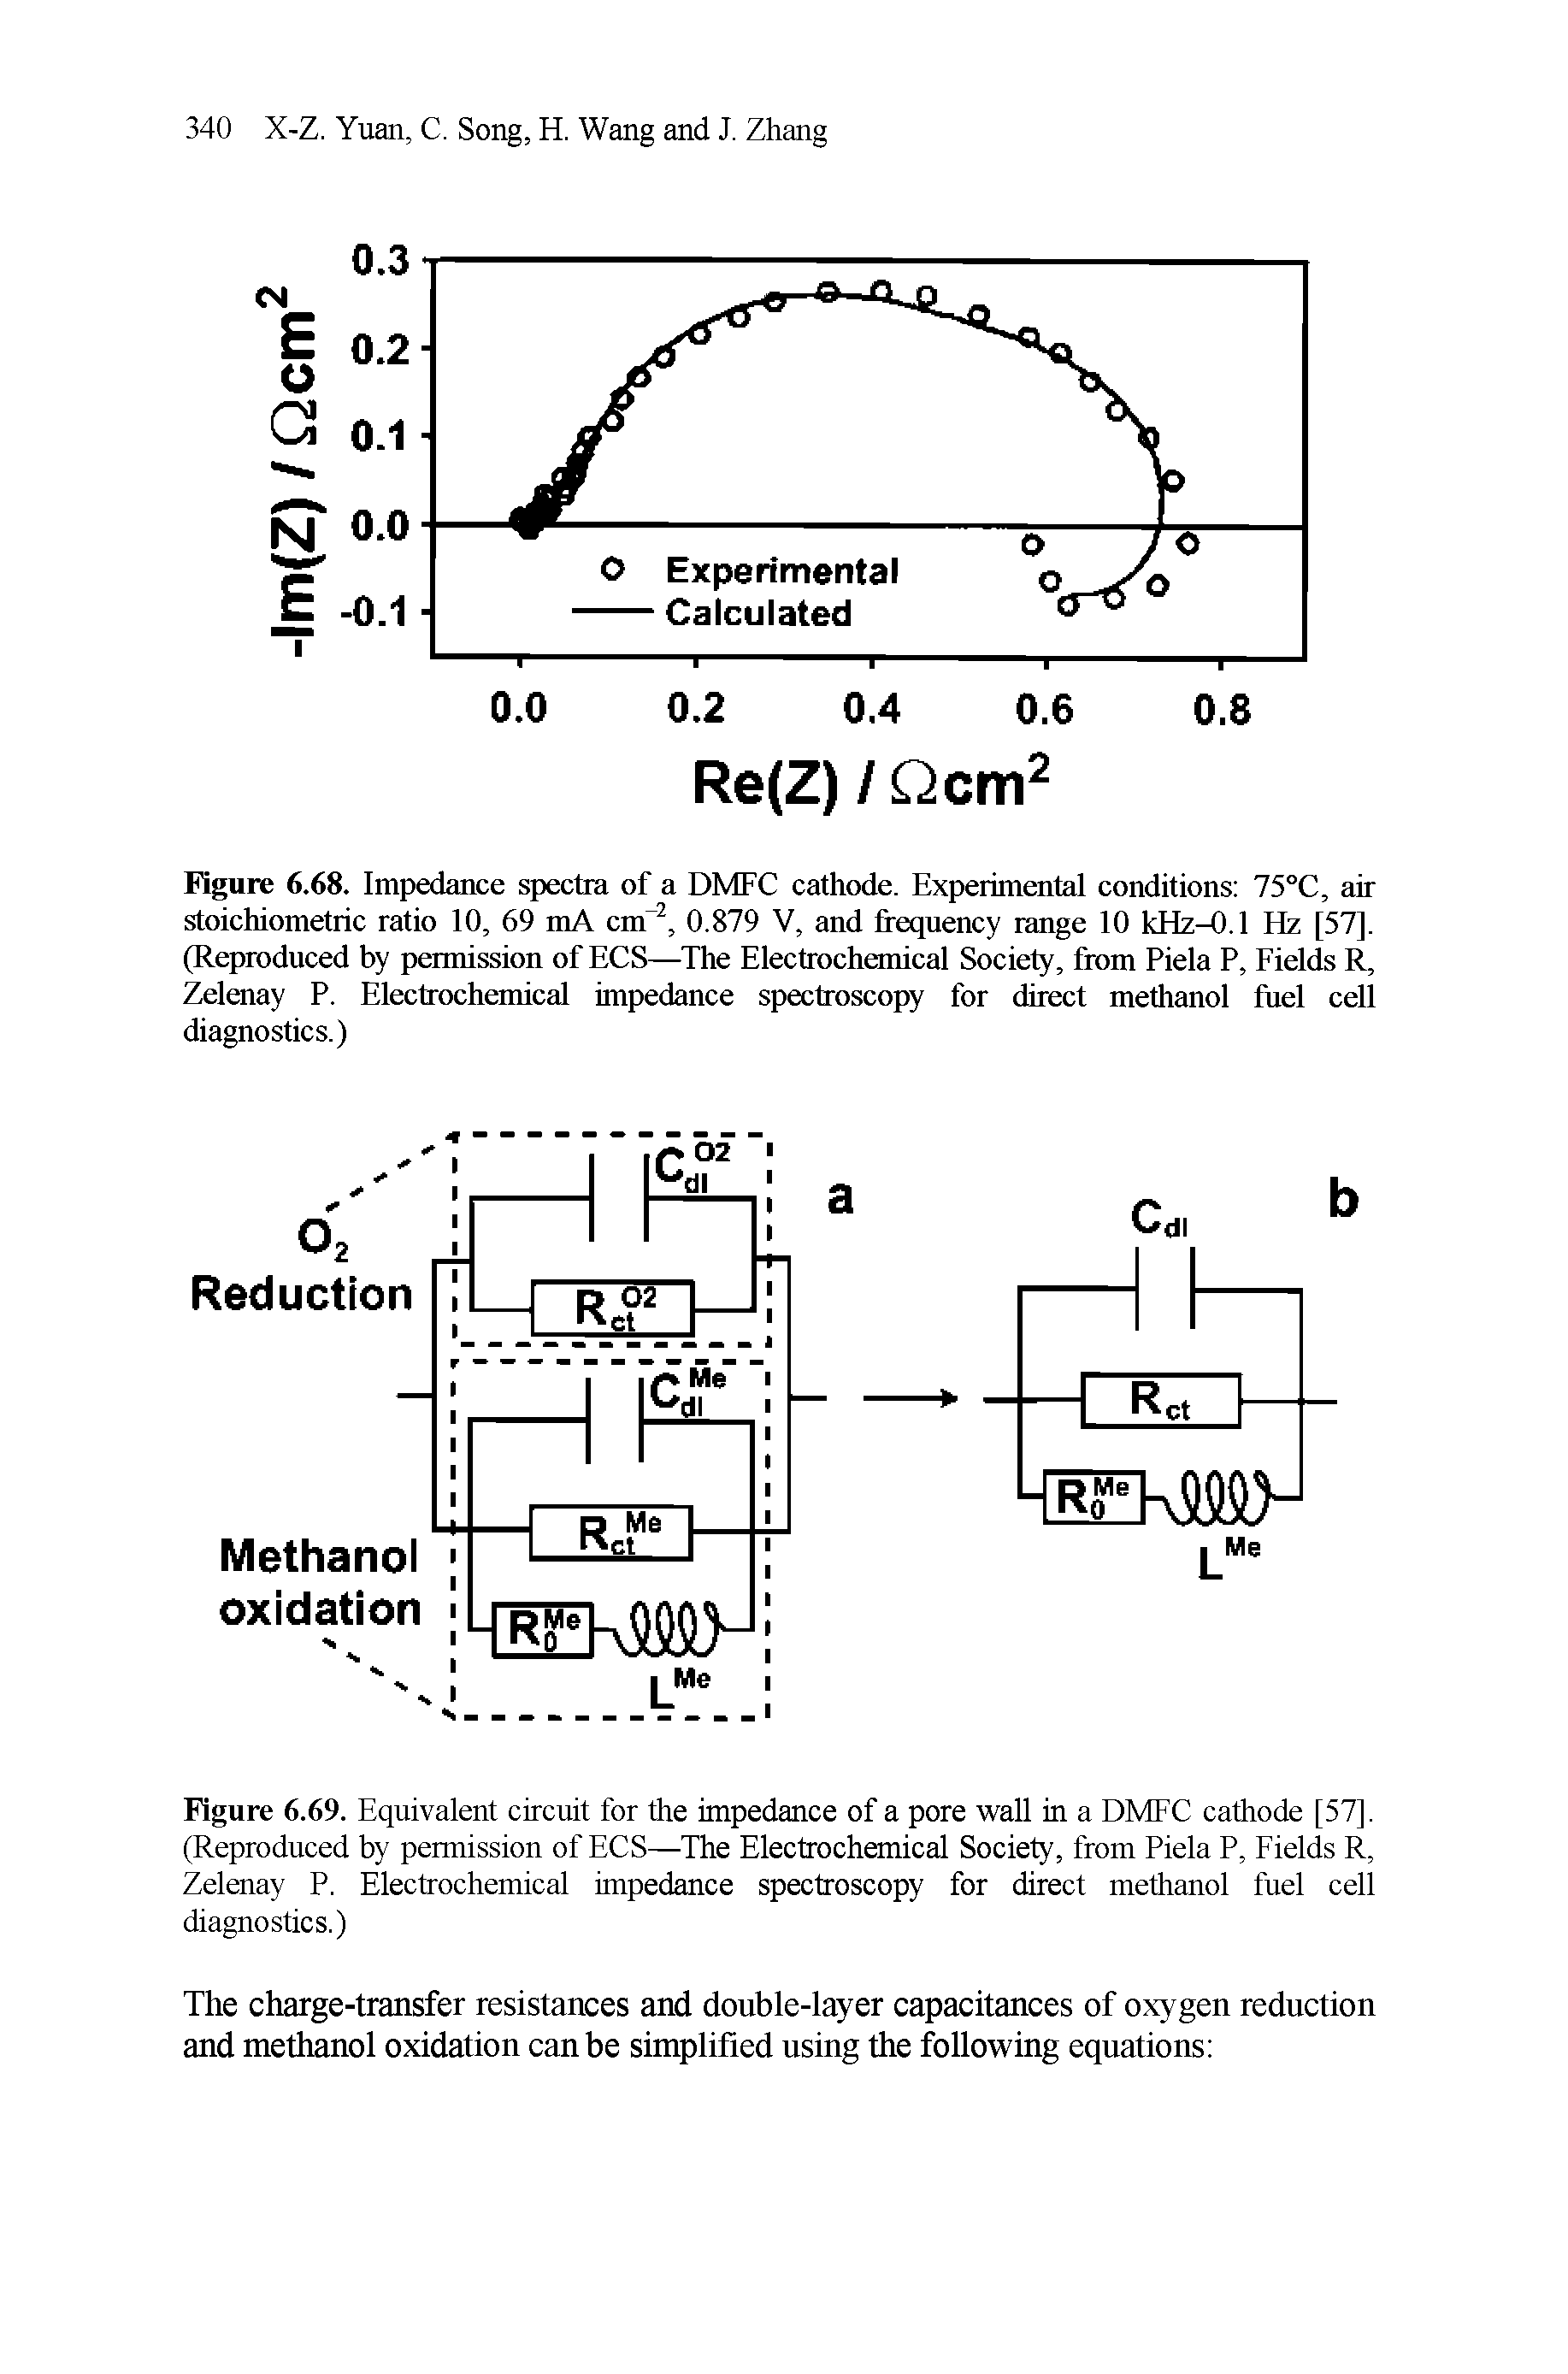 Figure 6.68. Impedance spectra of a DMFC cathode. Experimental conditions 75°C, air stoichiometric ratio 10, 69 mA cnT2, 0.879 V, and frequency range 10 kHz-0.1 Hz [57], (Reproduced by permission of ECS—The Electrochemical Society, from Piela P, Fields R, Zelenay P. Electrochemical impedance spectroscopy for direct methanol fuel cell diagnostics.)...